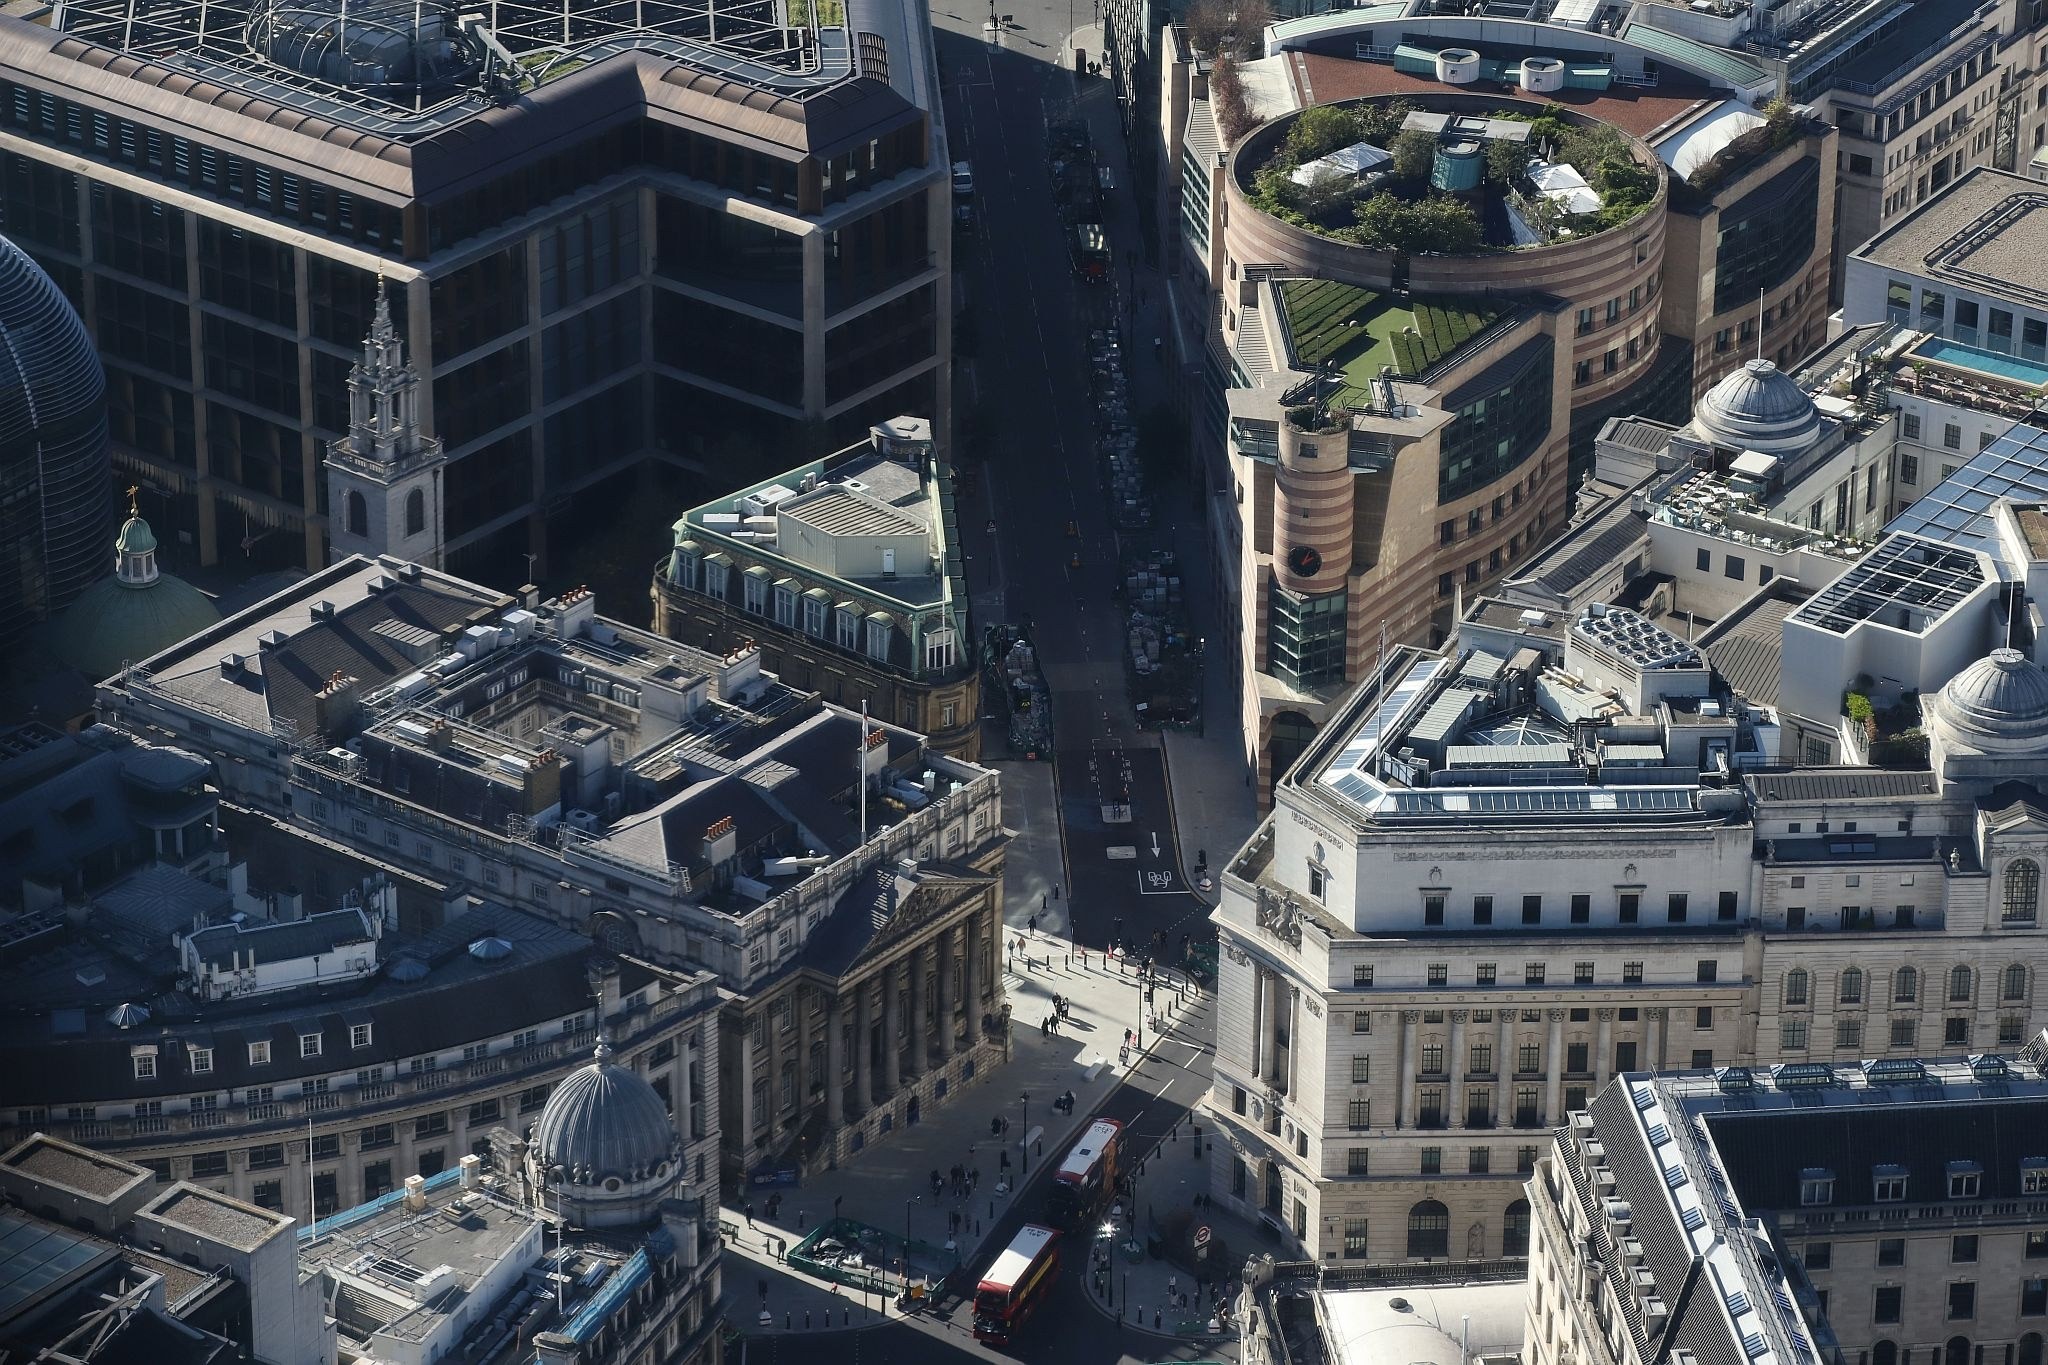 Aerial view of Bank junction, the Mansion House and Number 1 Poultry in the City of London. View from the Horizon observation platform on the 58th floor of 22 Bishopsgate in the City of London. Photo taken on 15-Oct-2023.